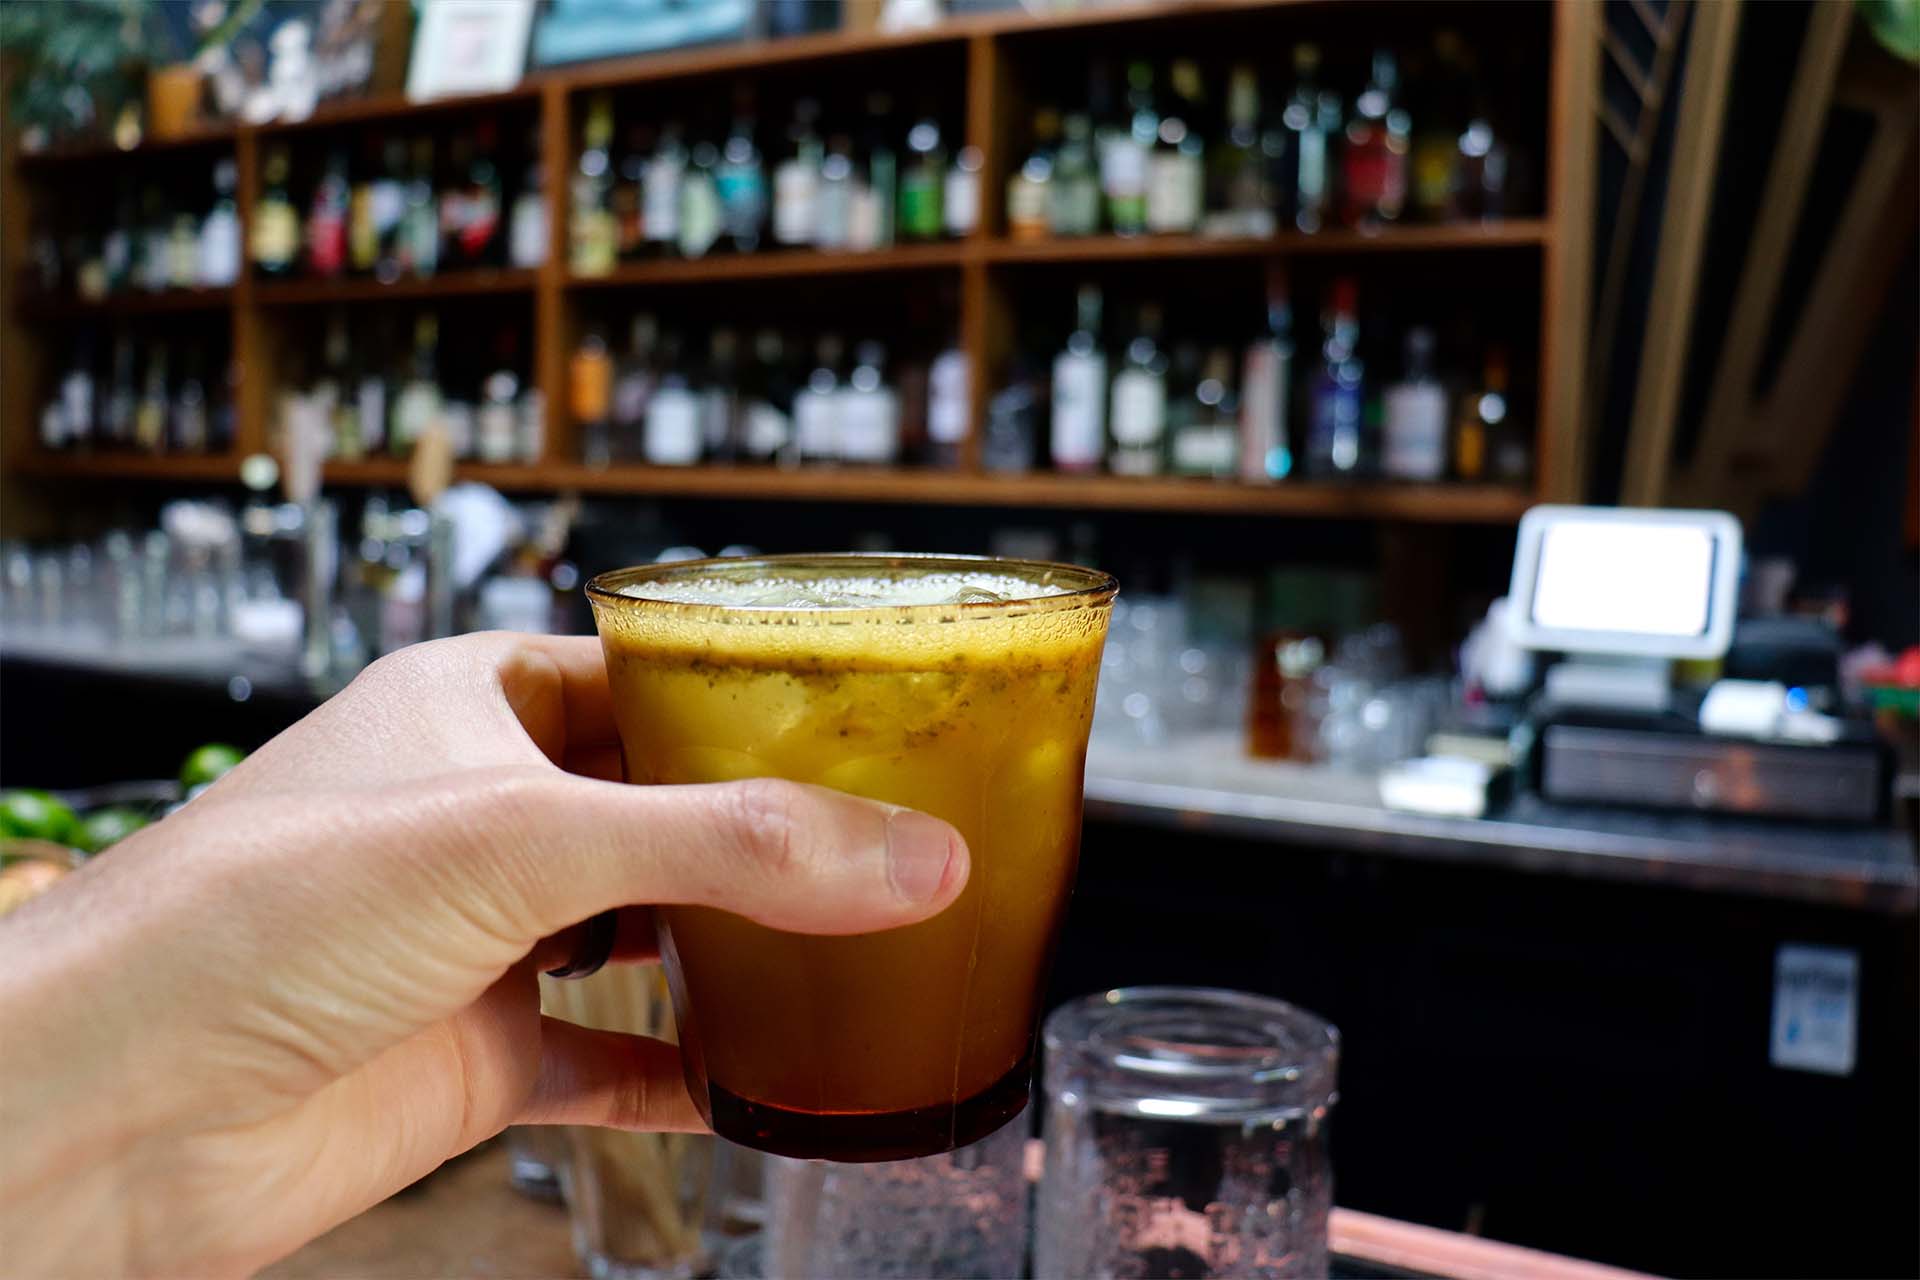 A hand holding up a cocktail, with fruity, pulpy bits floating on top. A fully stocked bar is visible in the background.